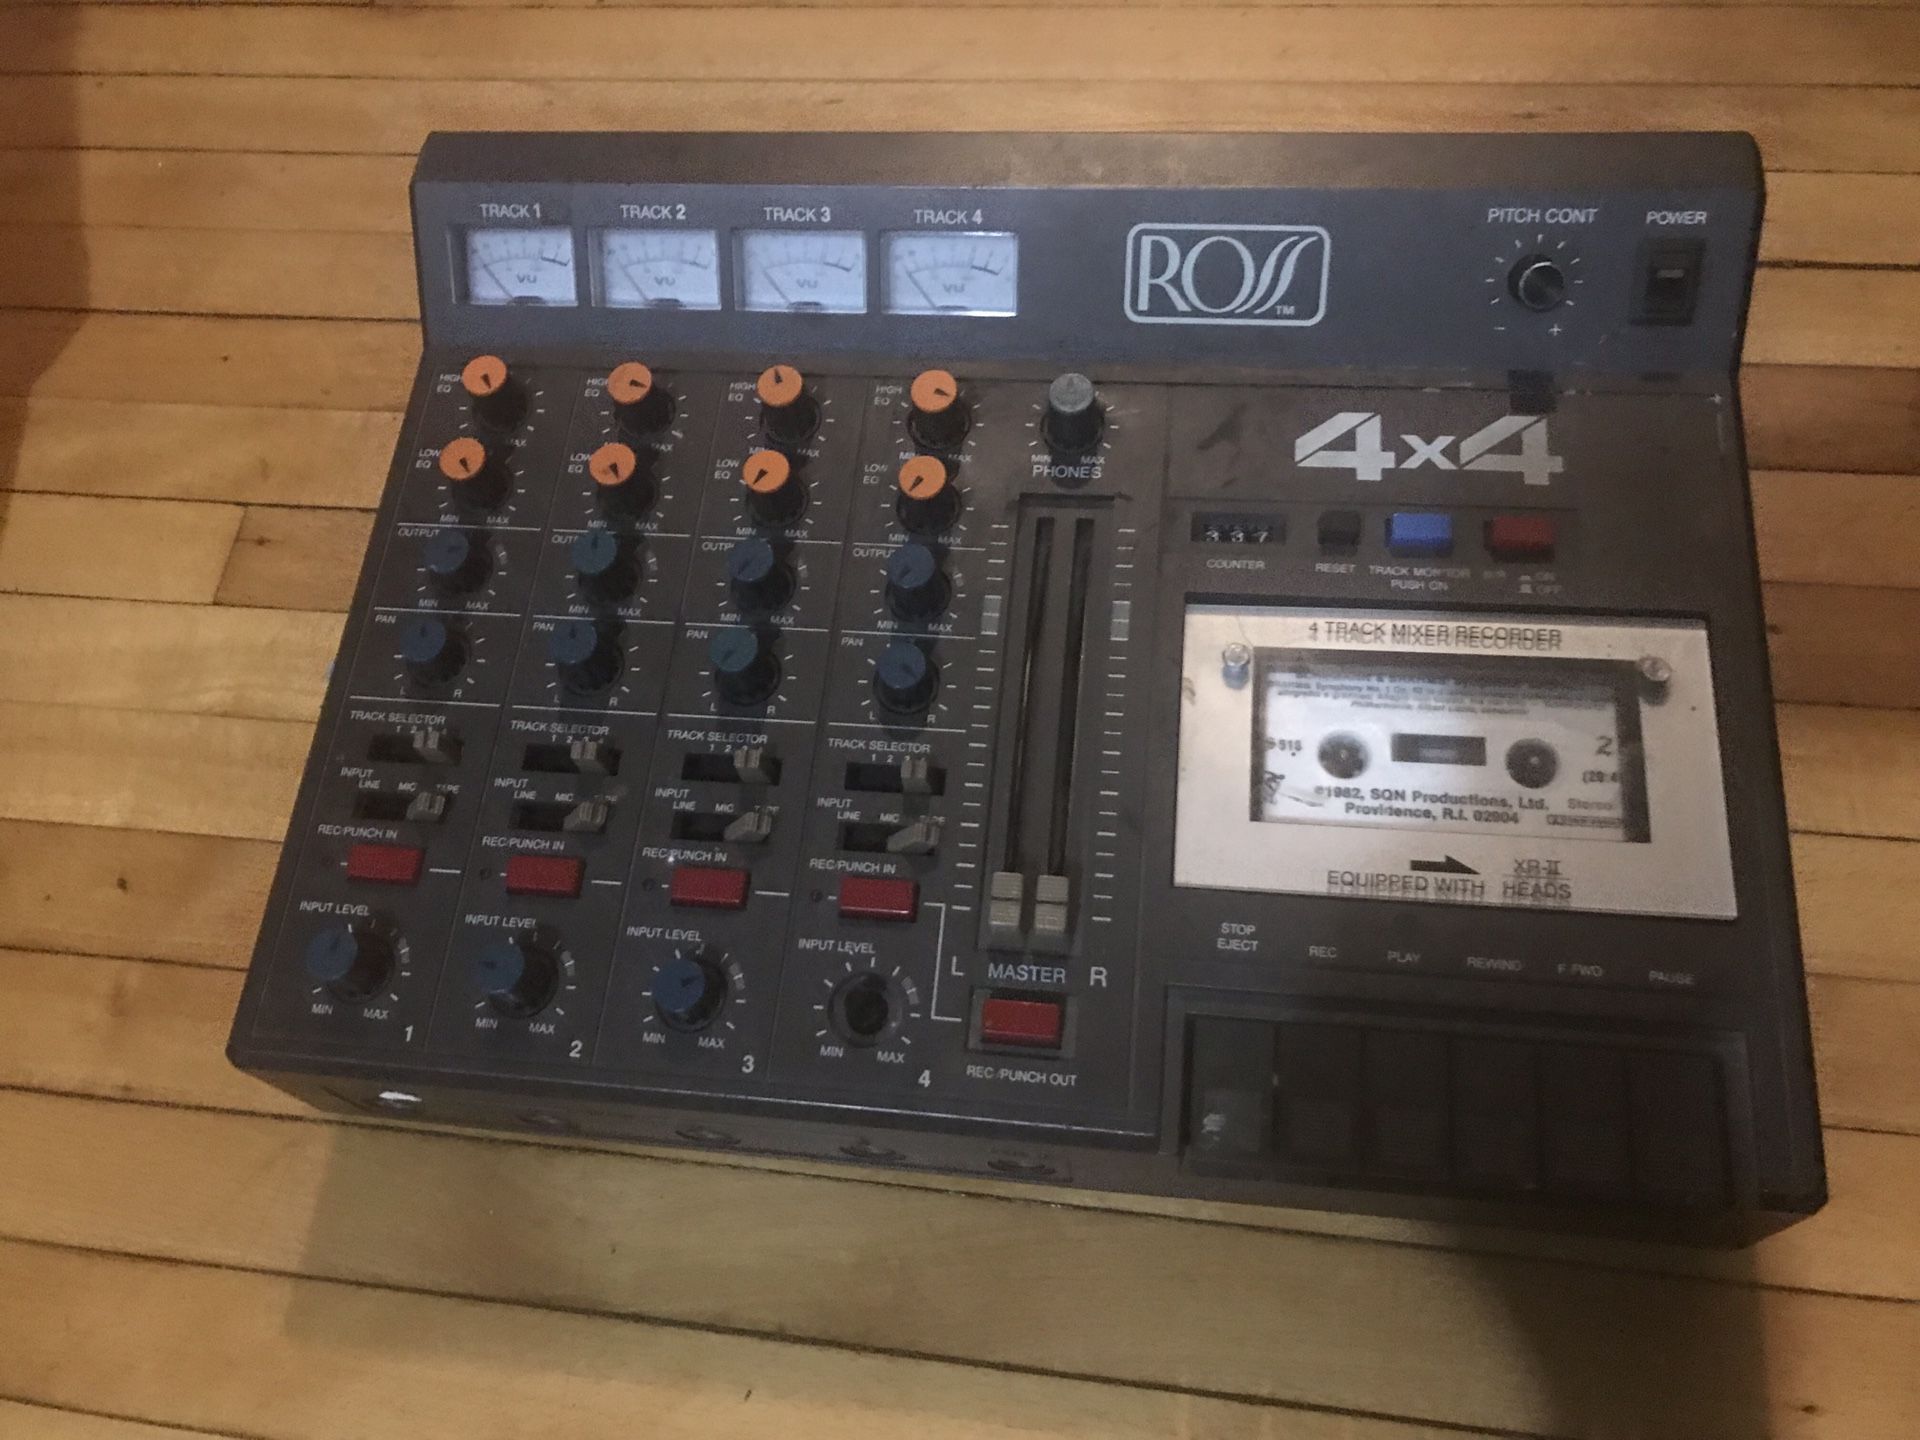 Ross 4x4 -4-Track Tape Recorder